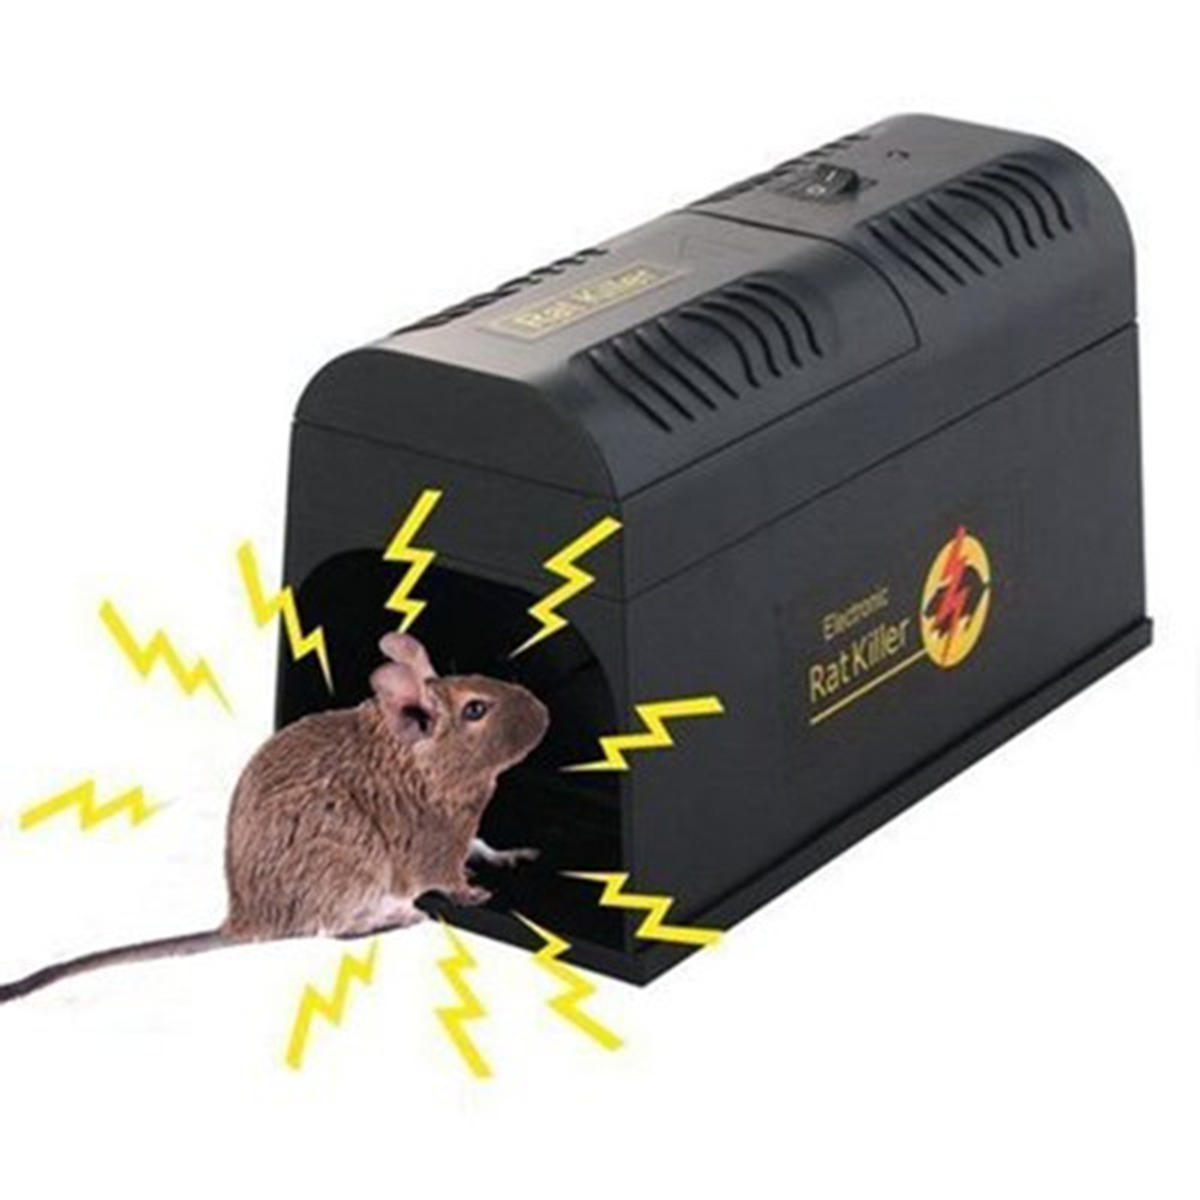 Electronic Rat And Rodent Trap Powfully Kill And Eliminate Rats Mice Or Other Similar Rodents Efficiently And Safely